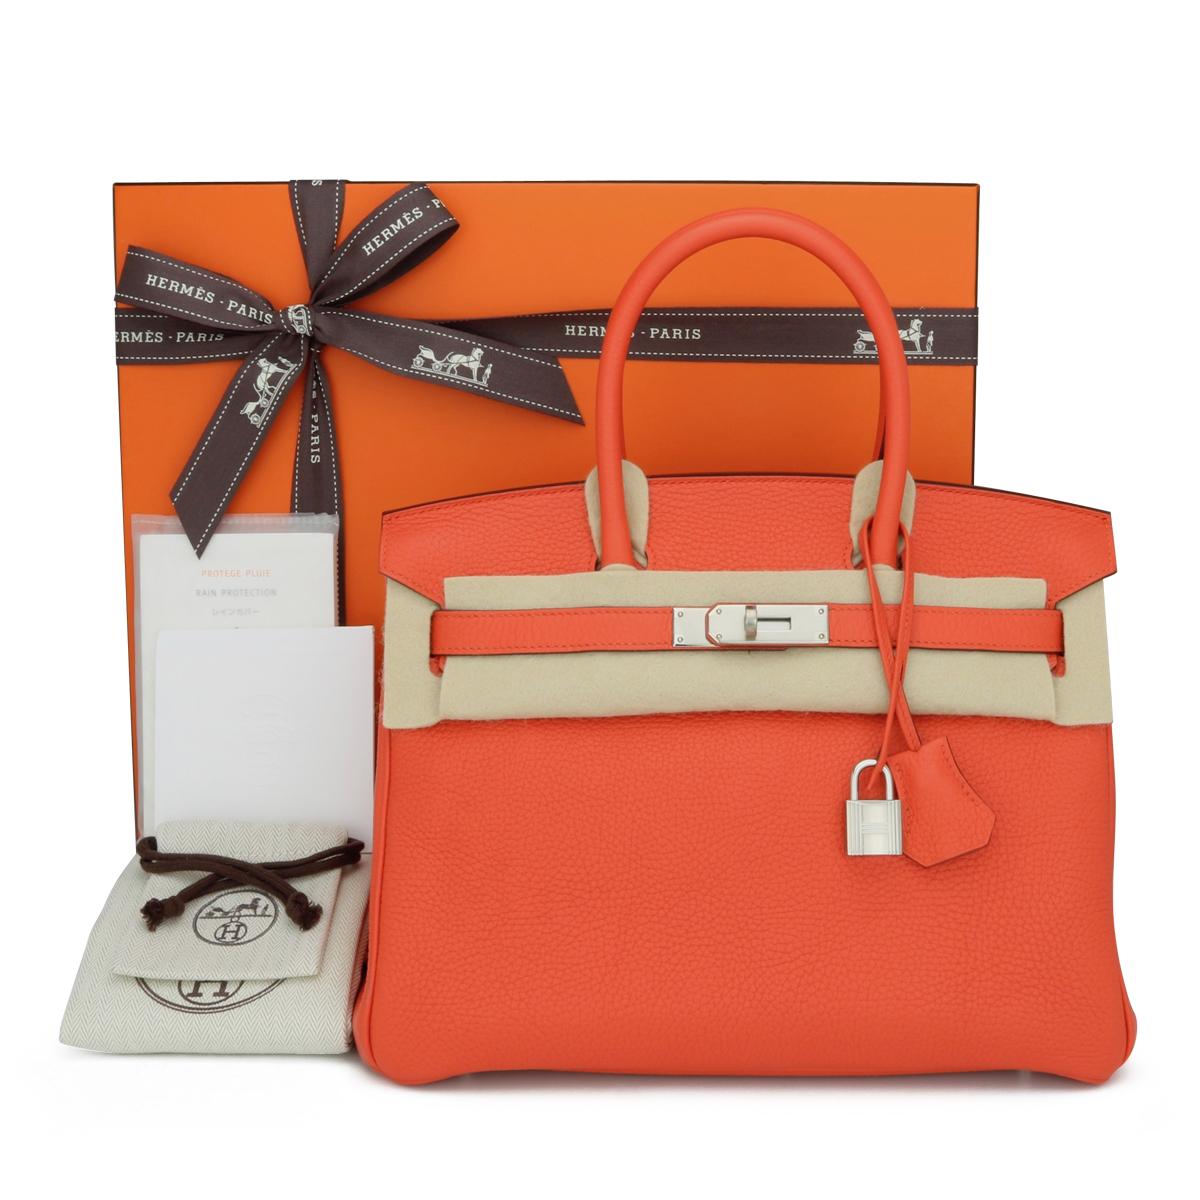 Hermès Birkin Bag 30cm Poppy Orange Togo Leather with Palladium Hardware Stamp T_Year 2015.

This bag is still in very good condition. The leather still smells fresh, and it still retains its original shape. The hardware is still very shiny.

A